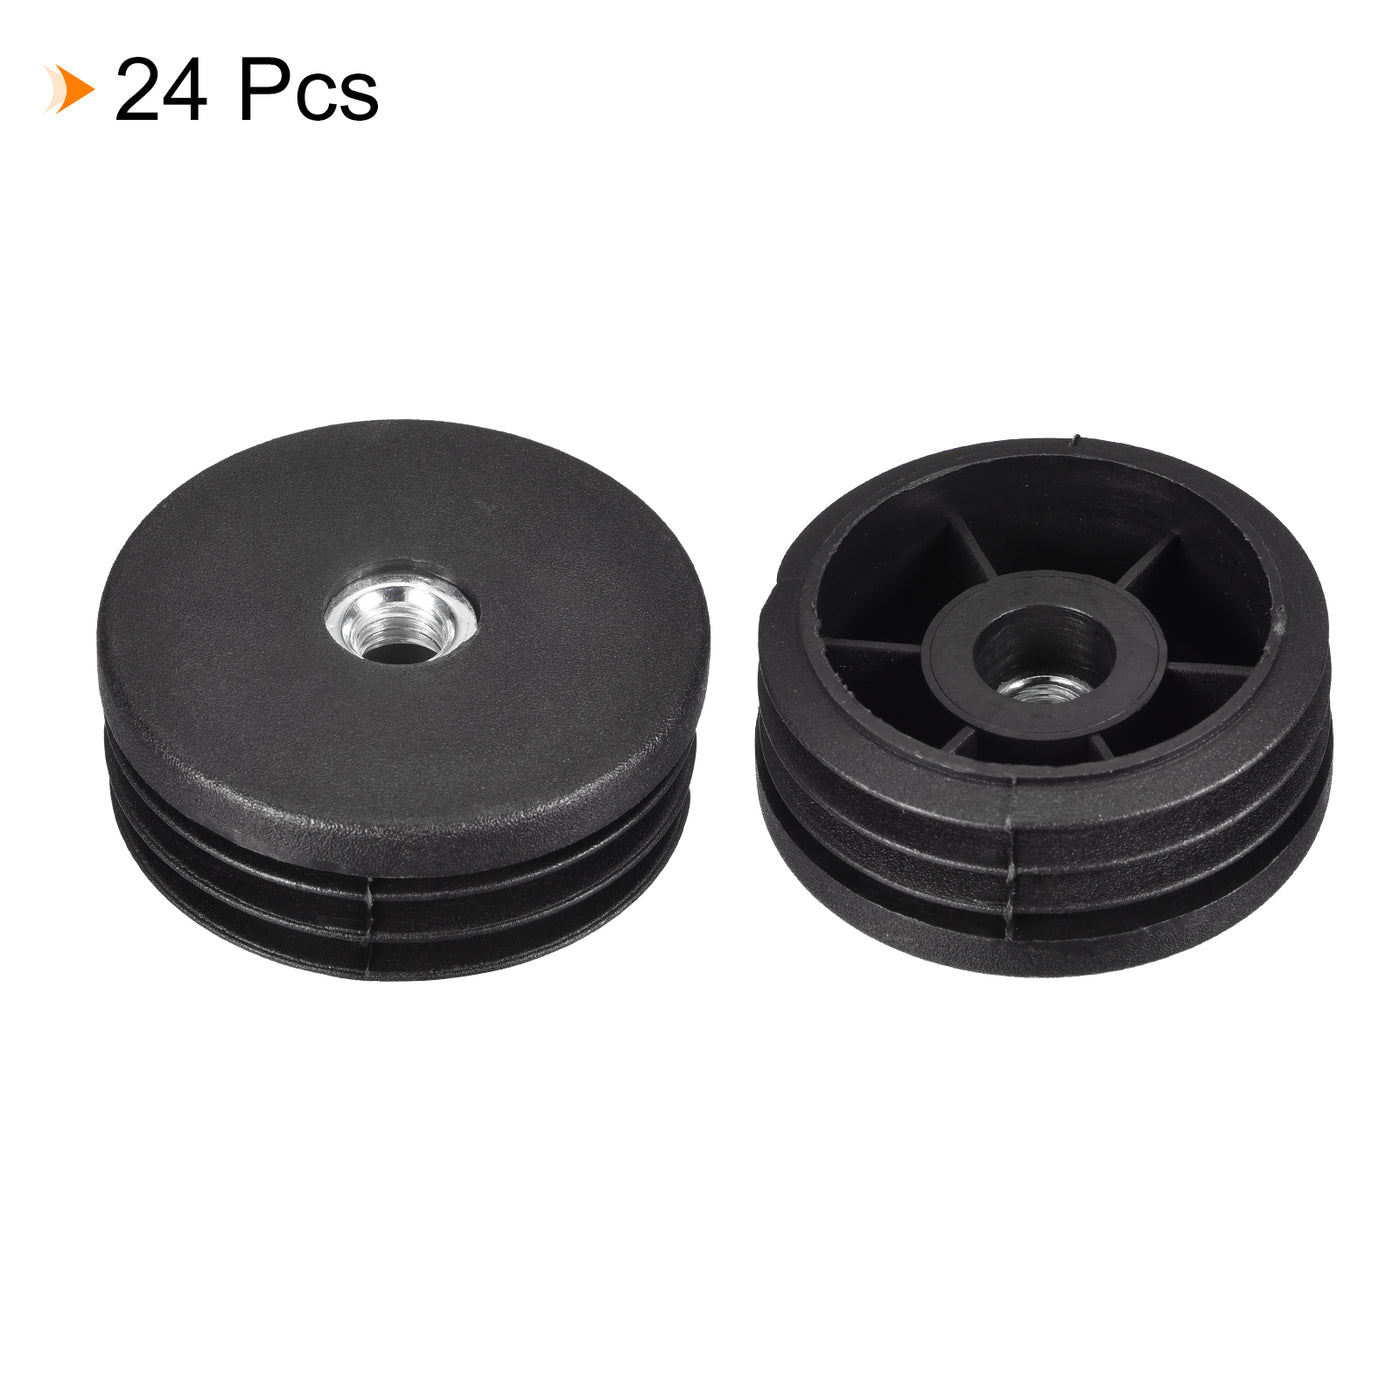 uxcell Uxcell 24Pcs 50mm/1.97" Caster Insert with Thread, Round M8 Thread for Furniture